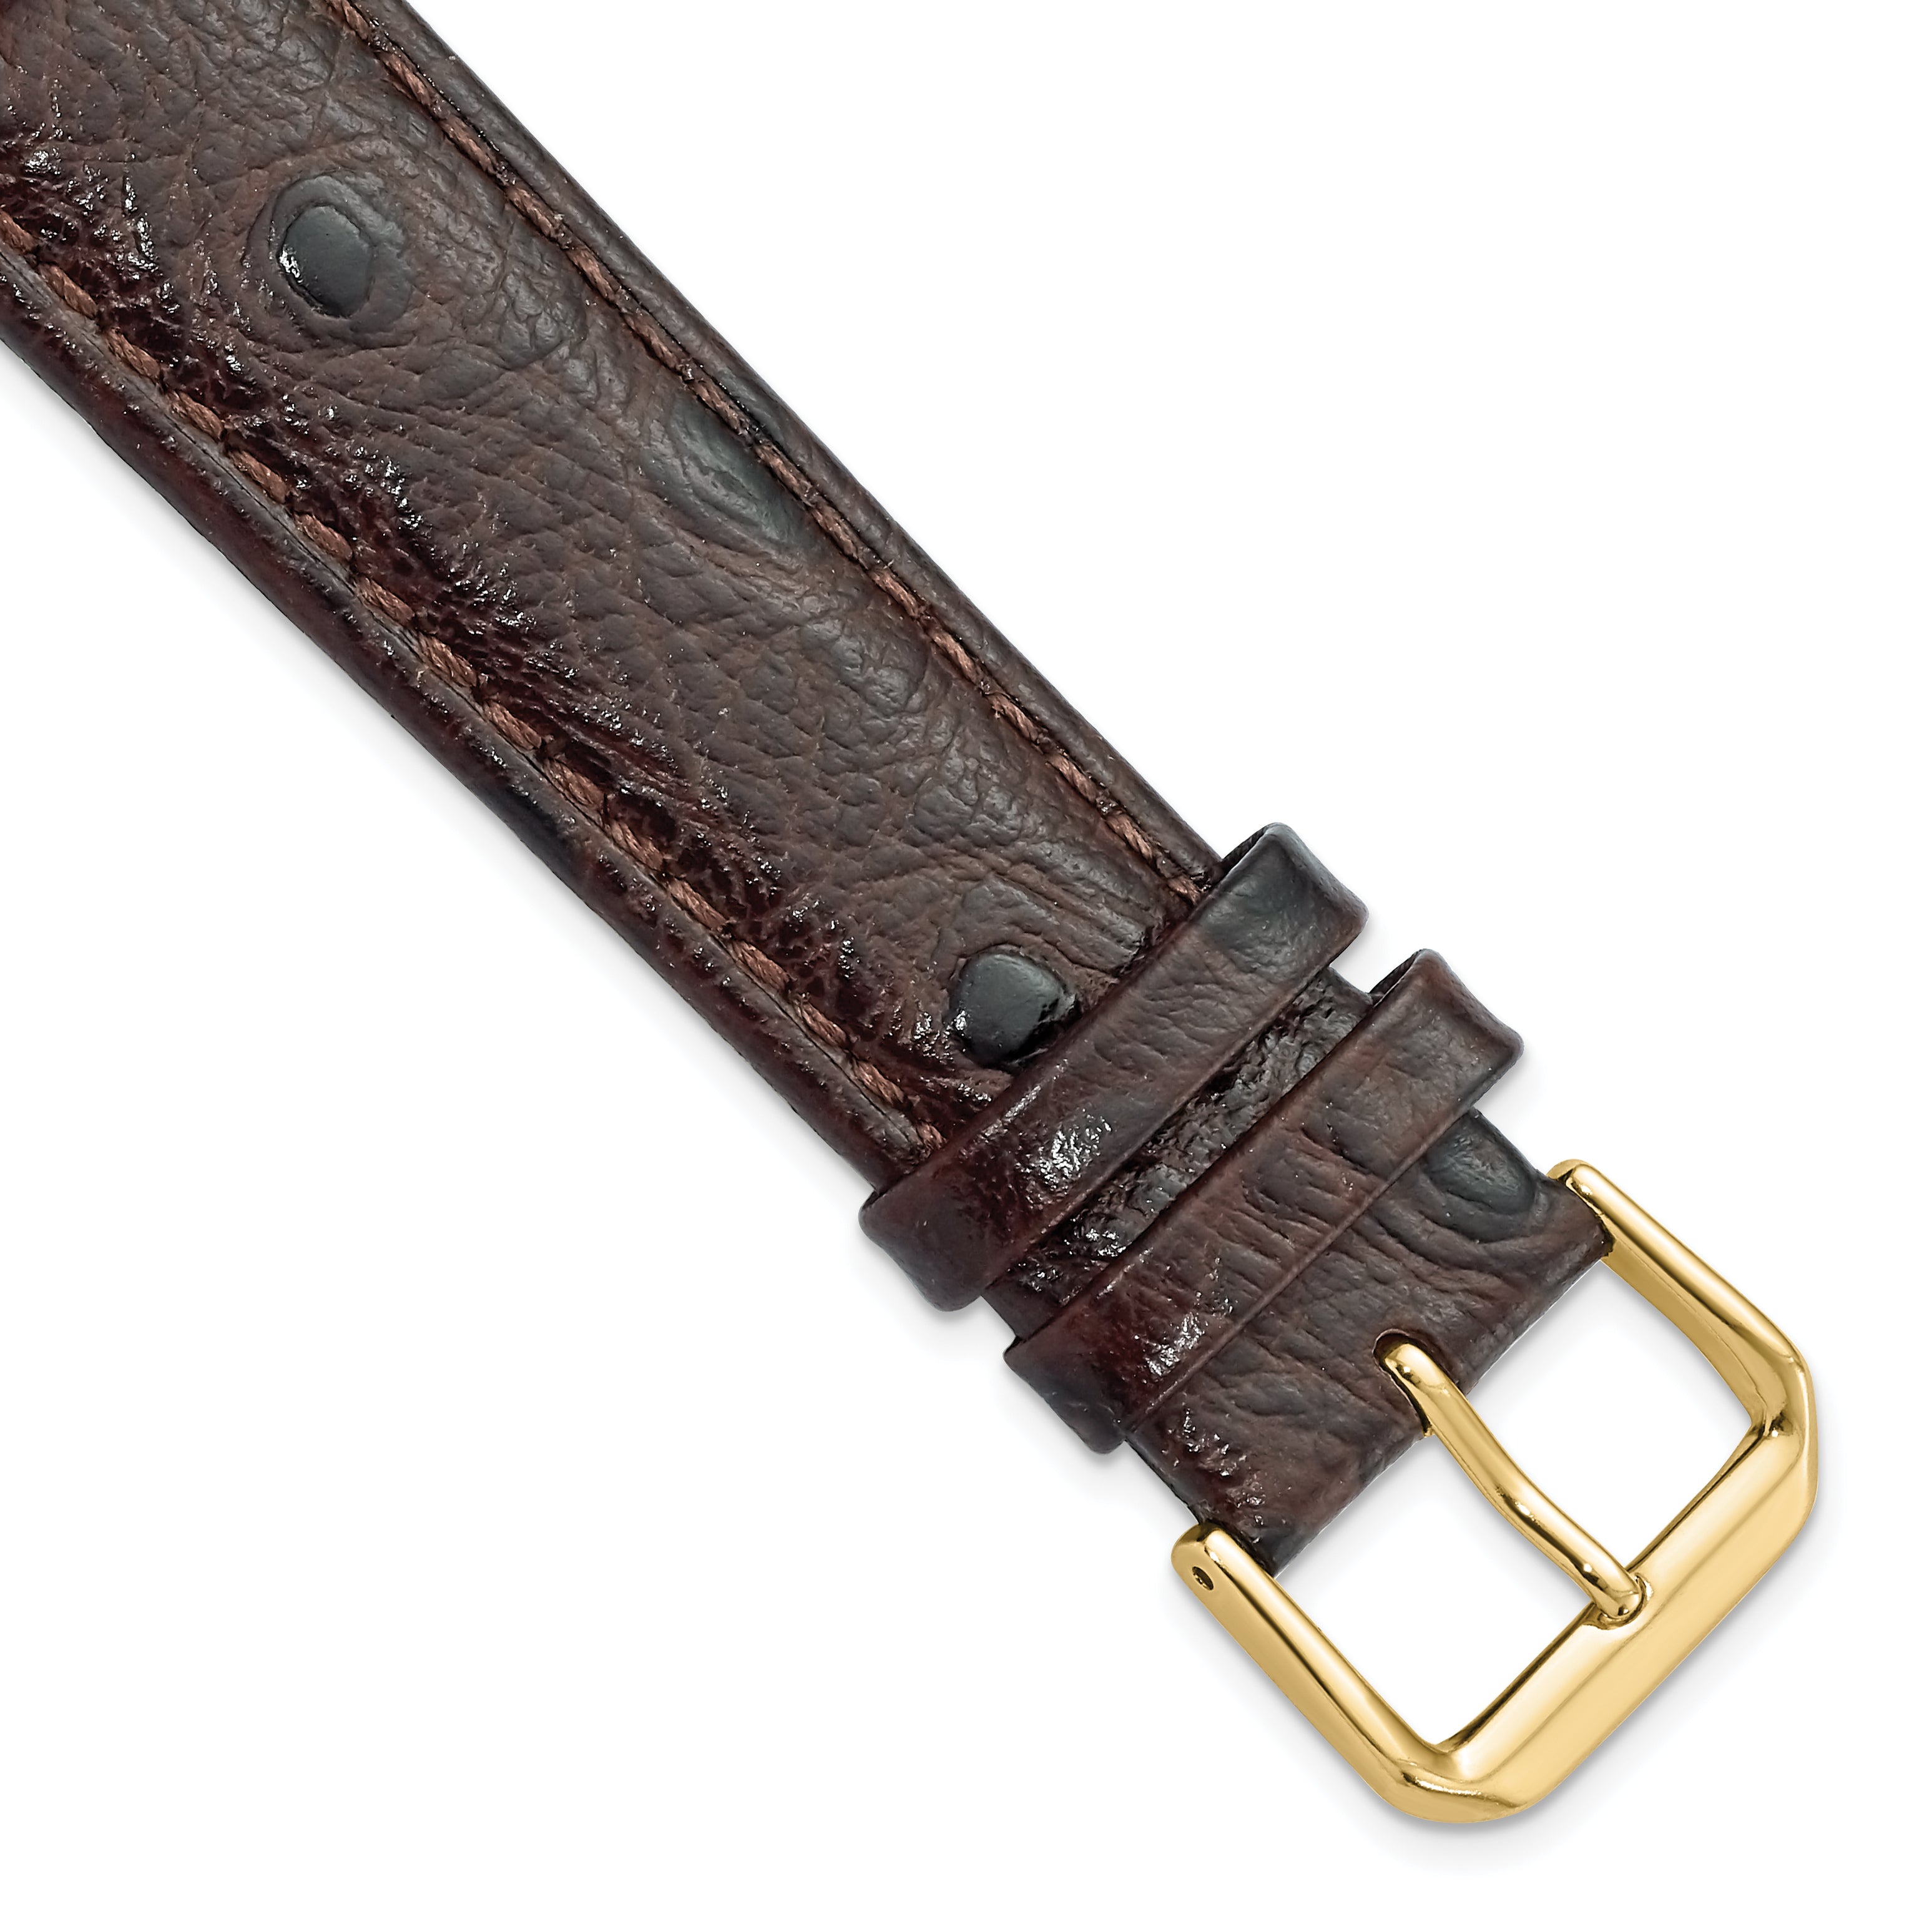 DeBeer 20mm Brown Ostrich Grain Leather with Gold-tone Buckle 7.5 inch Watch Band